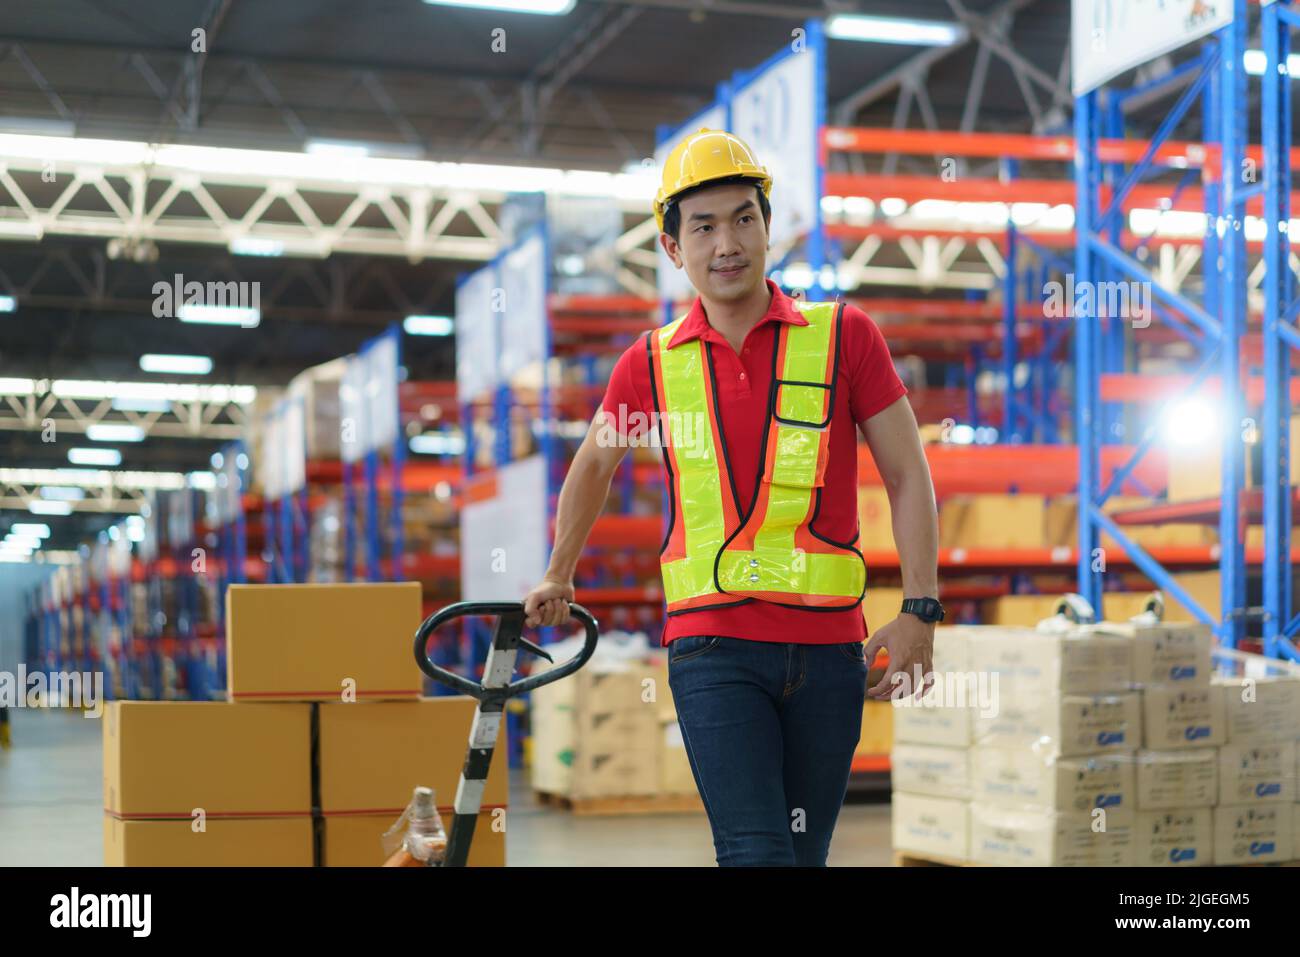 Shipping boxes. Asian man Warehouse worker unloading pallet shipment goods into a truck container, warehouse industry freight, logistics and transport Stock Photo